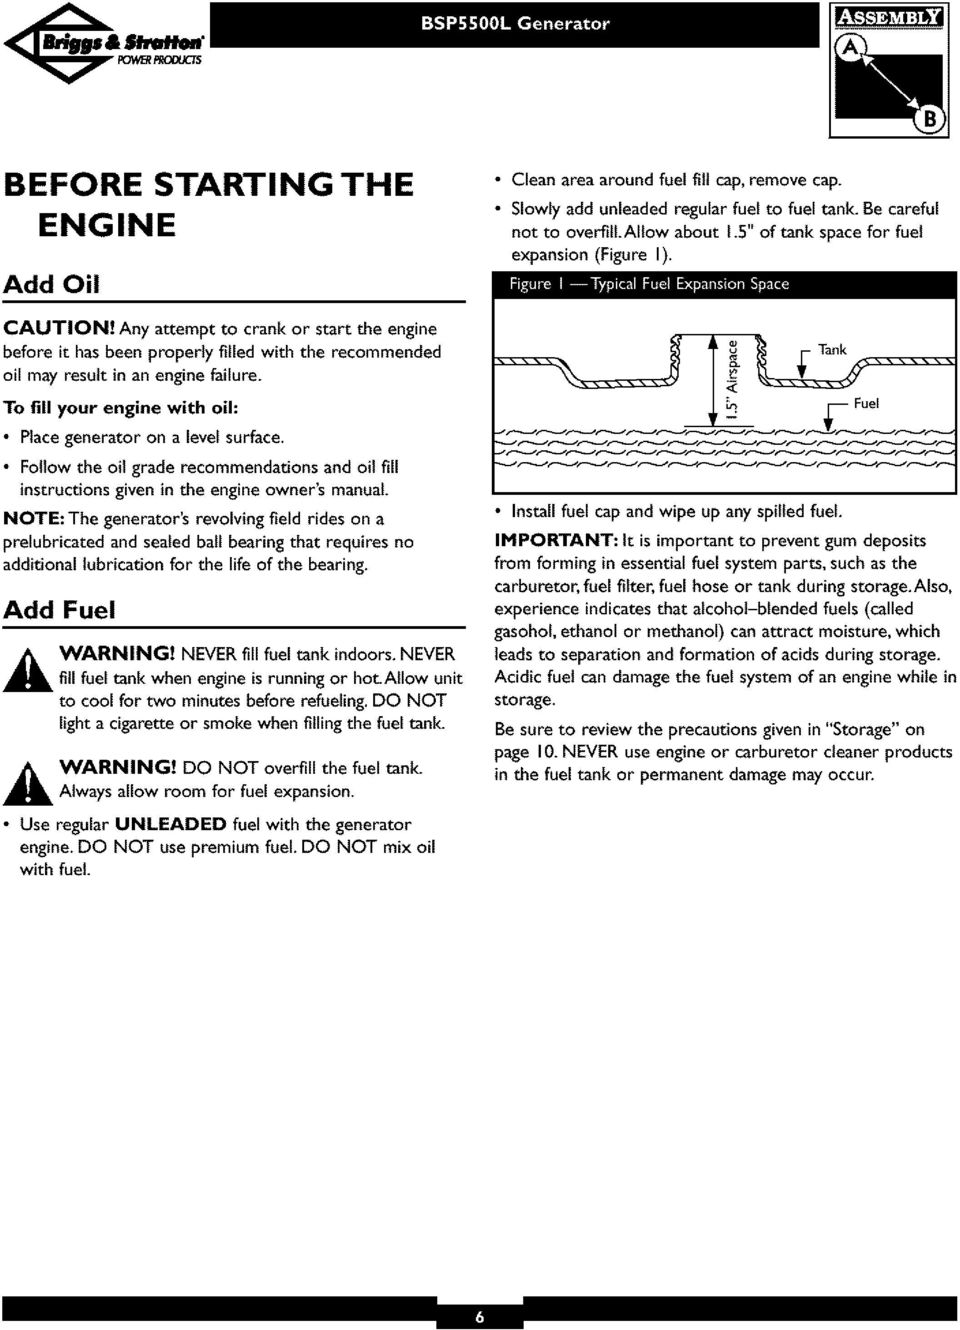 To fill your engine with oil: Placegenerator on a levelsurface. Follow the oil grade recommendations and oil fill instructionsgiven in the engine owner's manual.